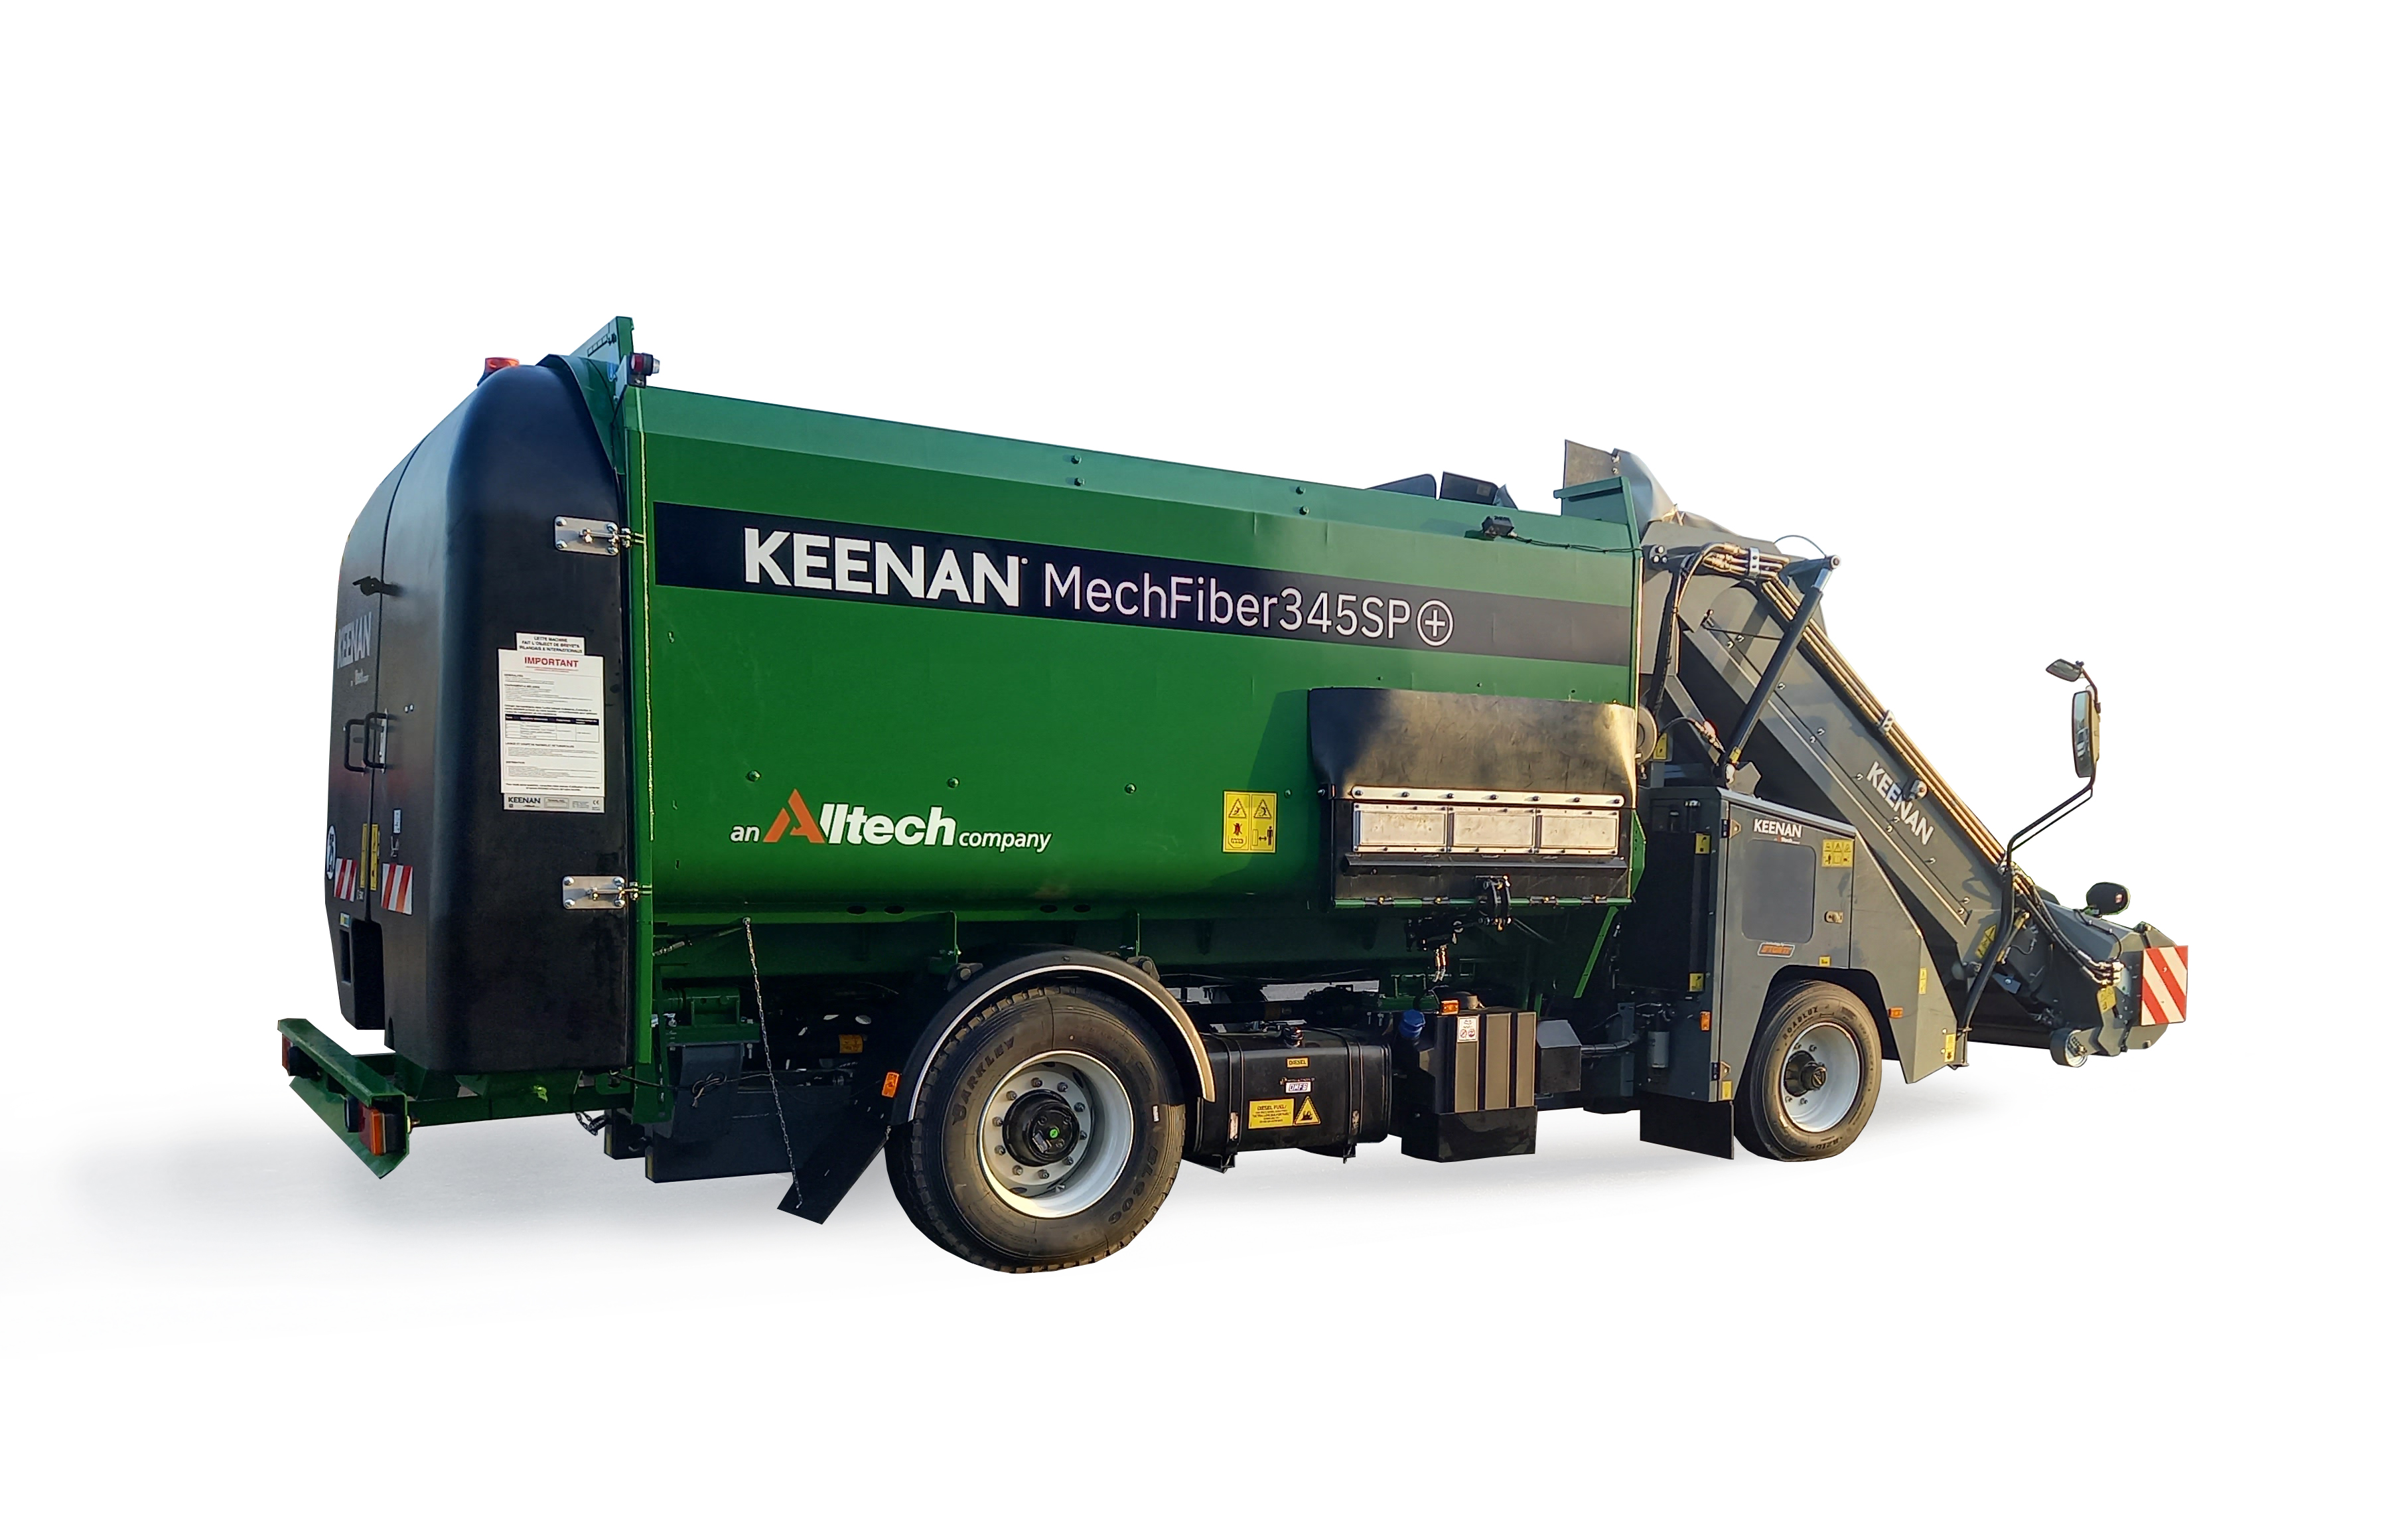 KEENAN MechFiber345SP+ feed out side view